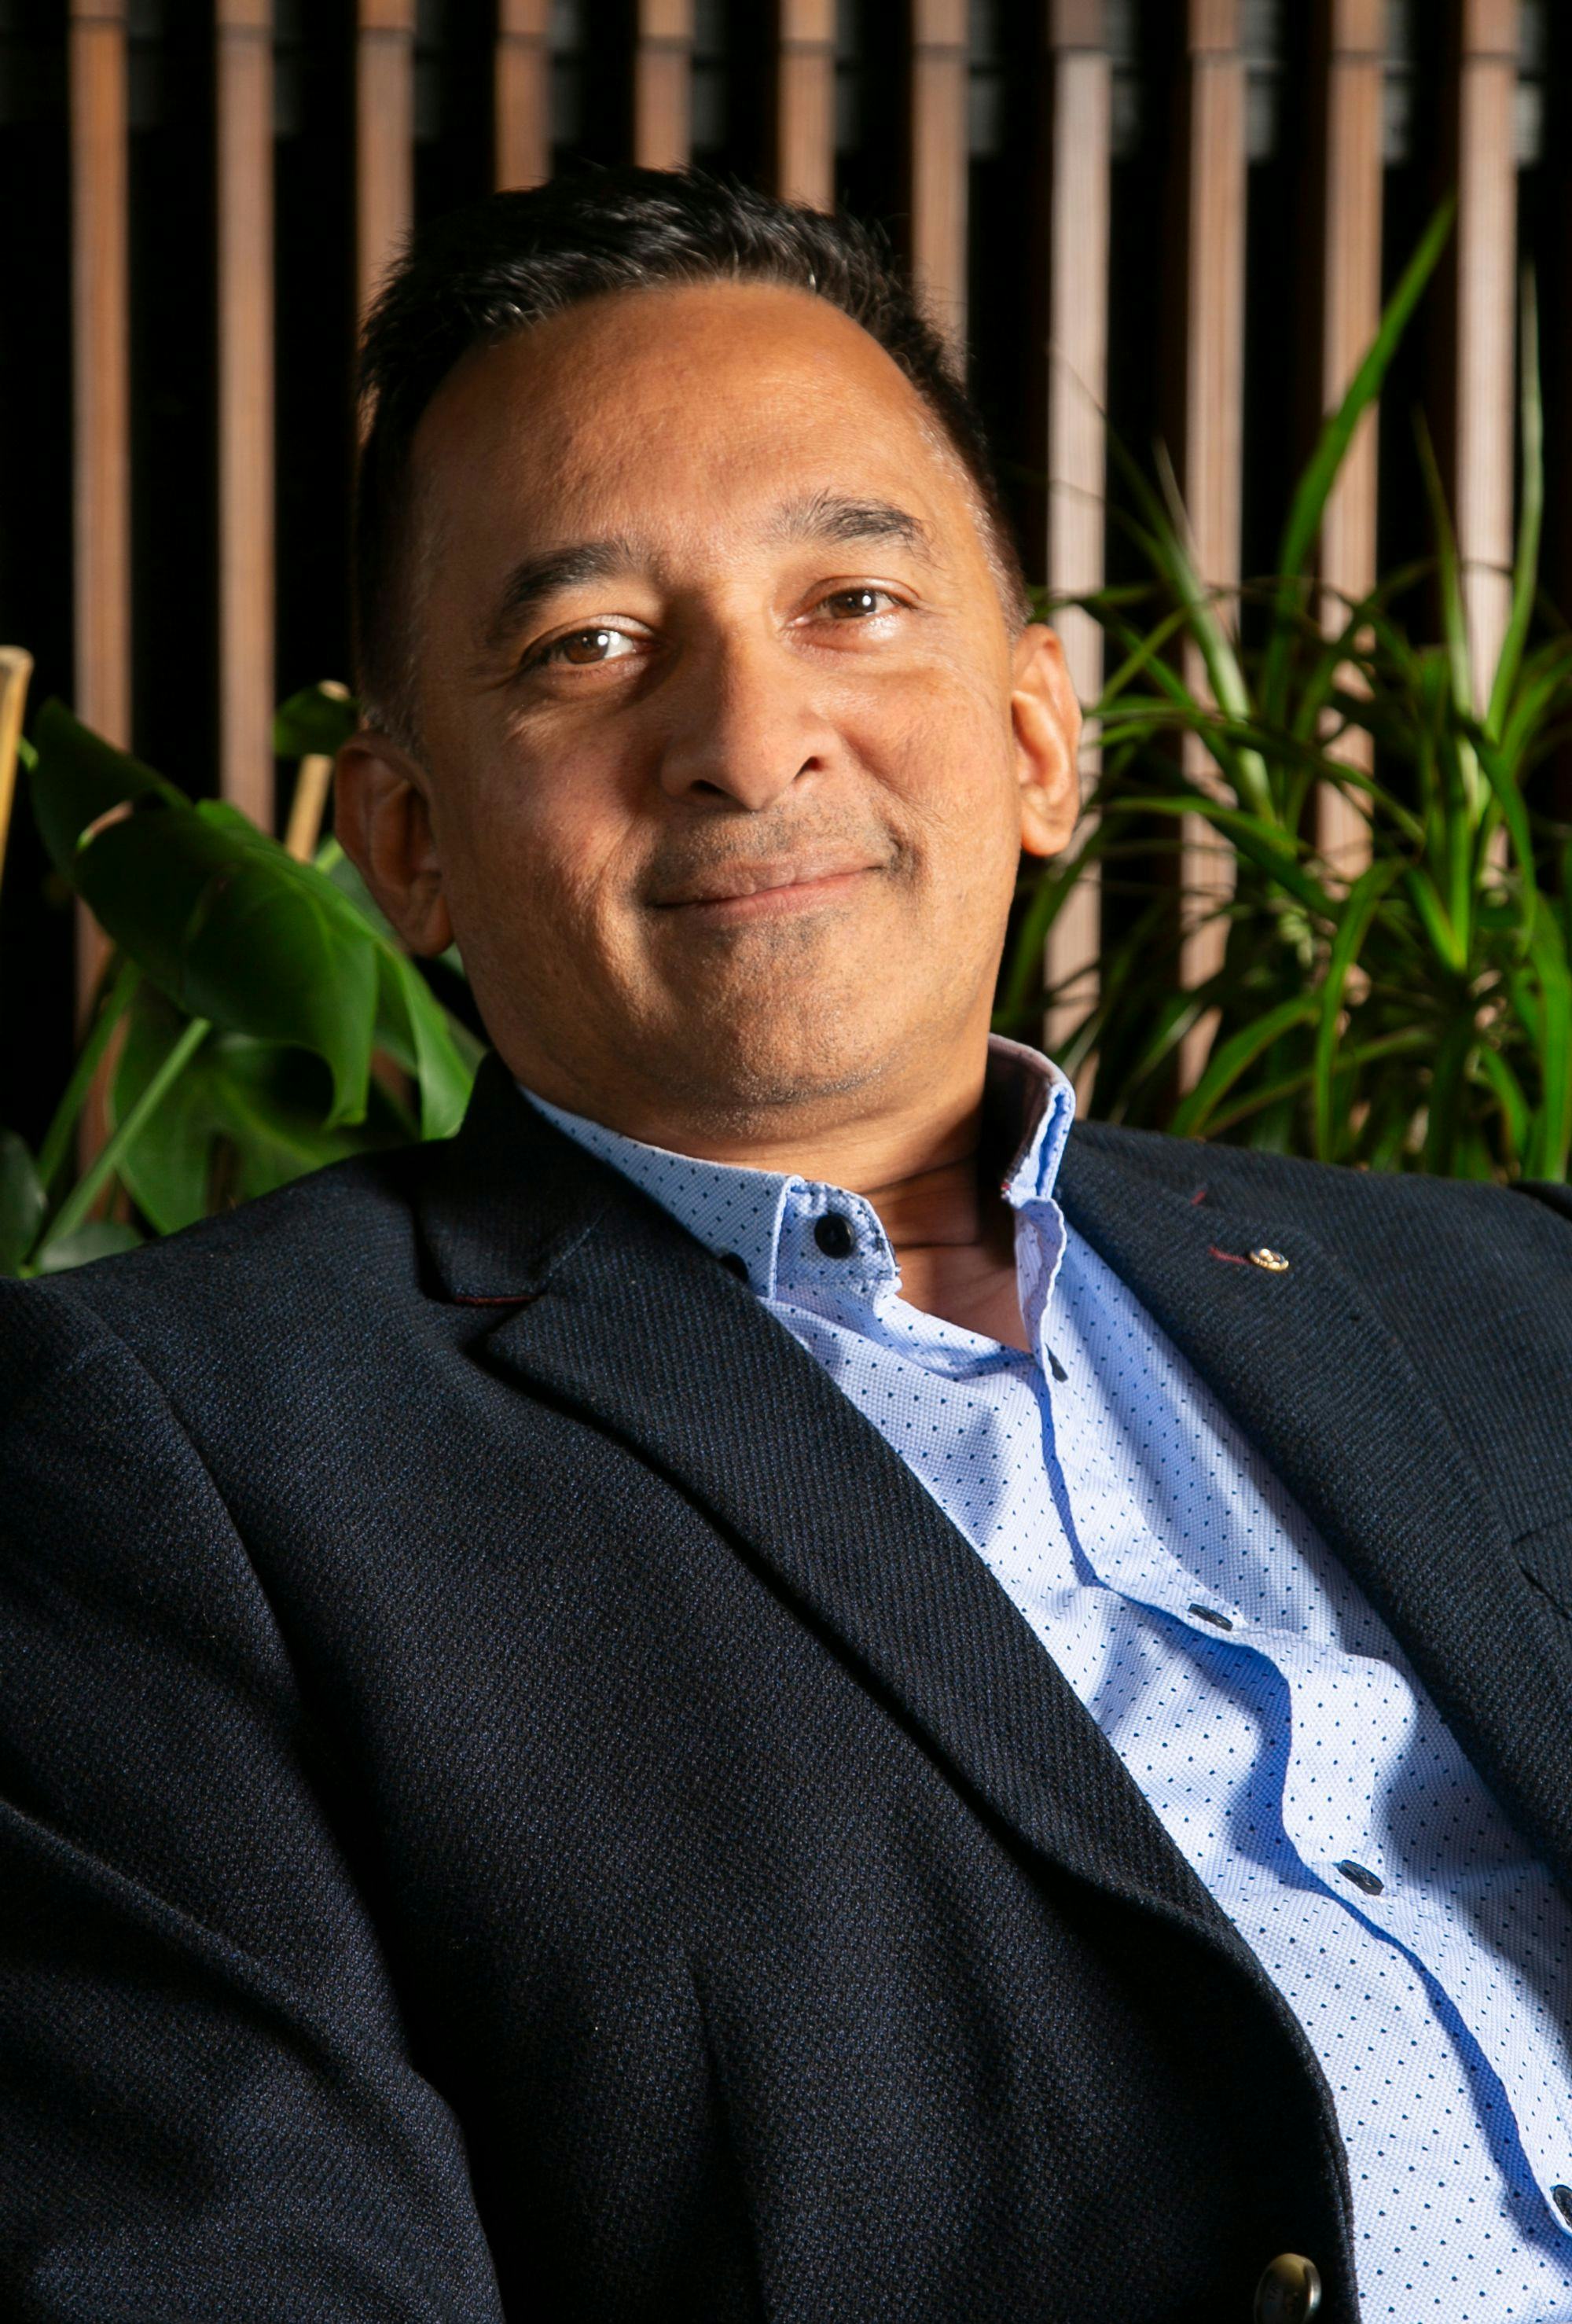 A portrait of a man smiling, wooden panels and plants in the background